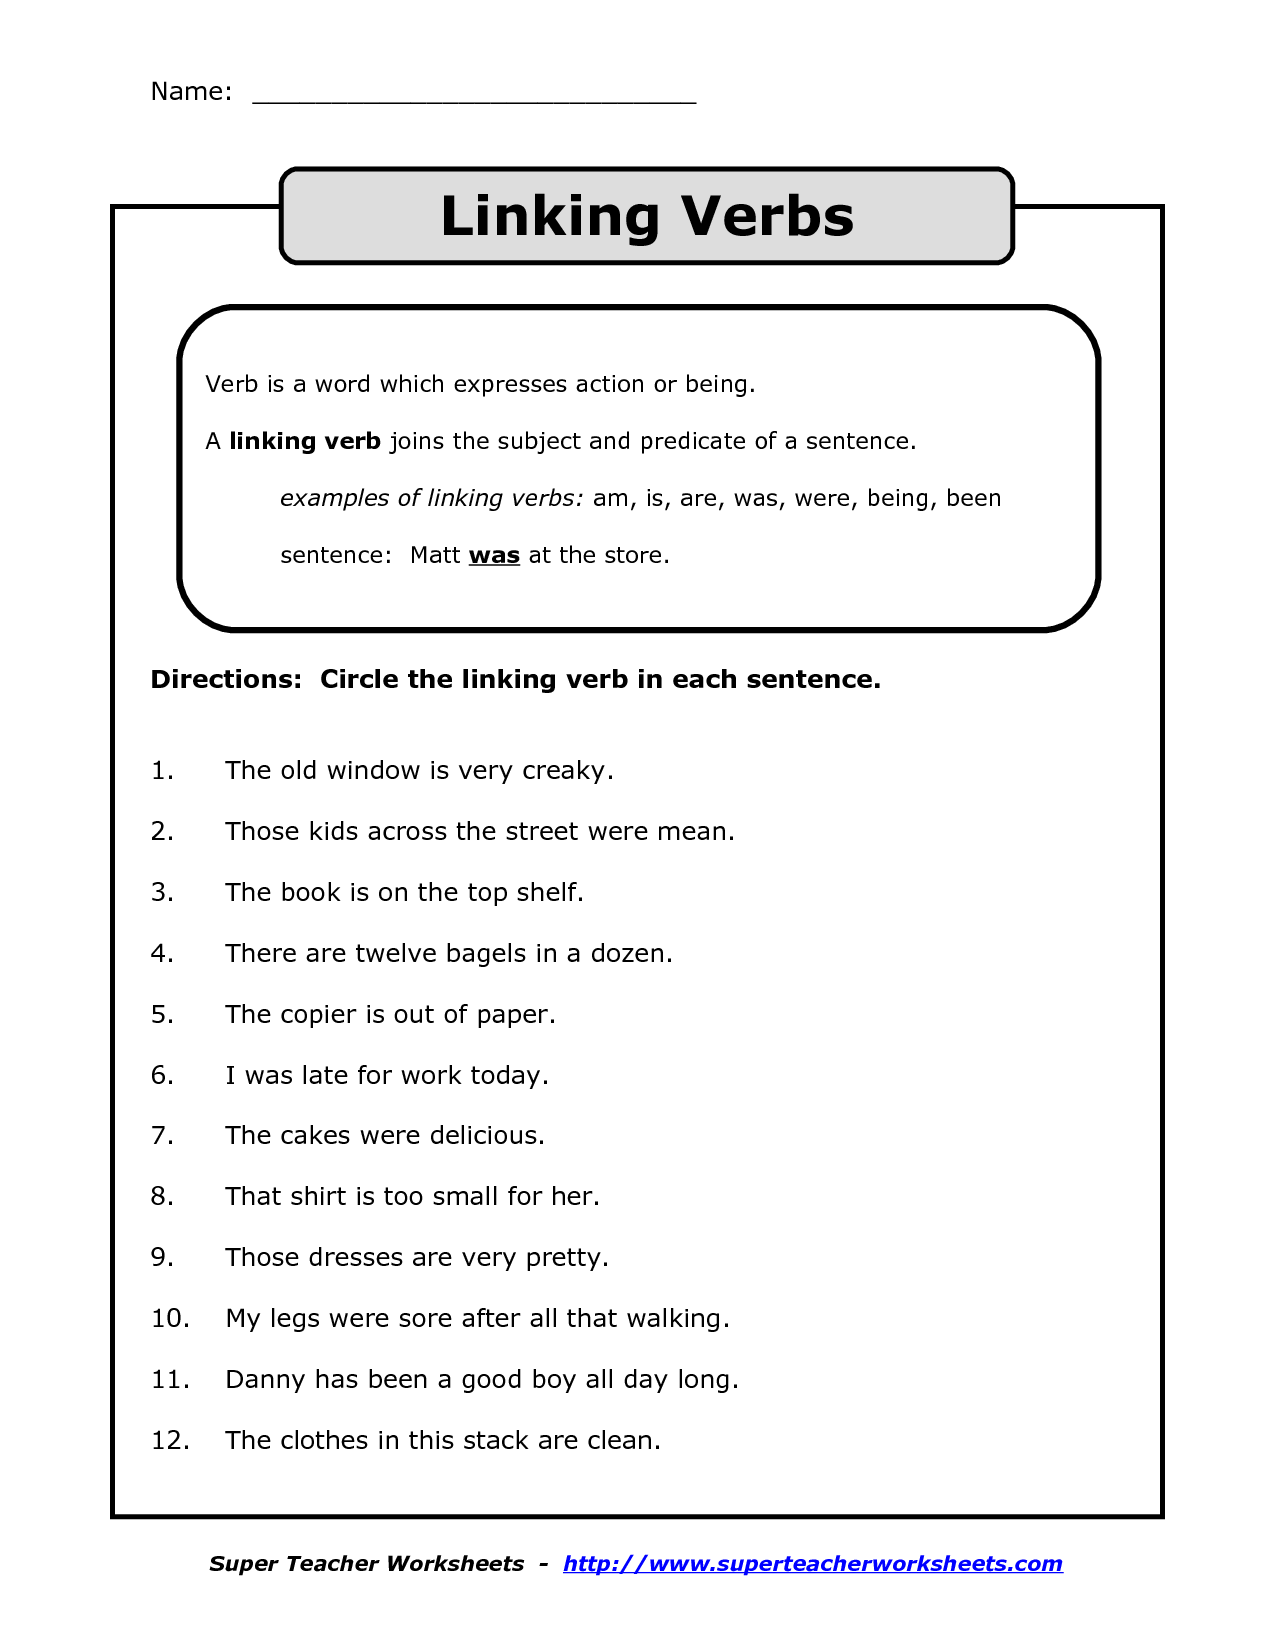 19 Best Images of 7th Grade Worksheets Verbs - 7th Grade Printable